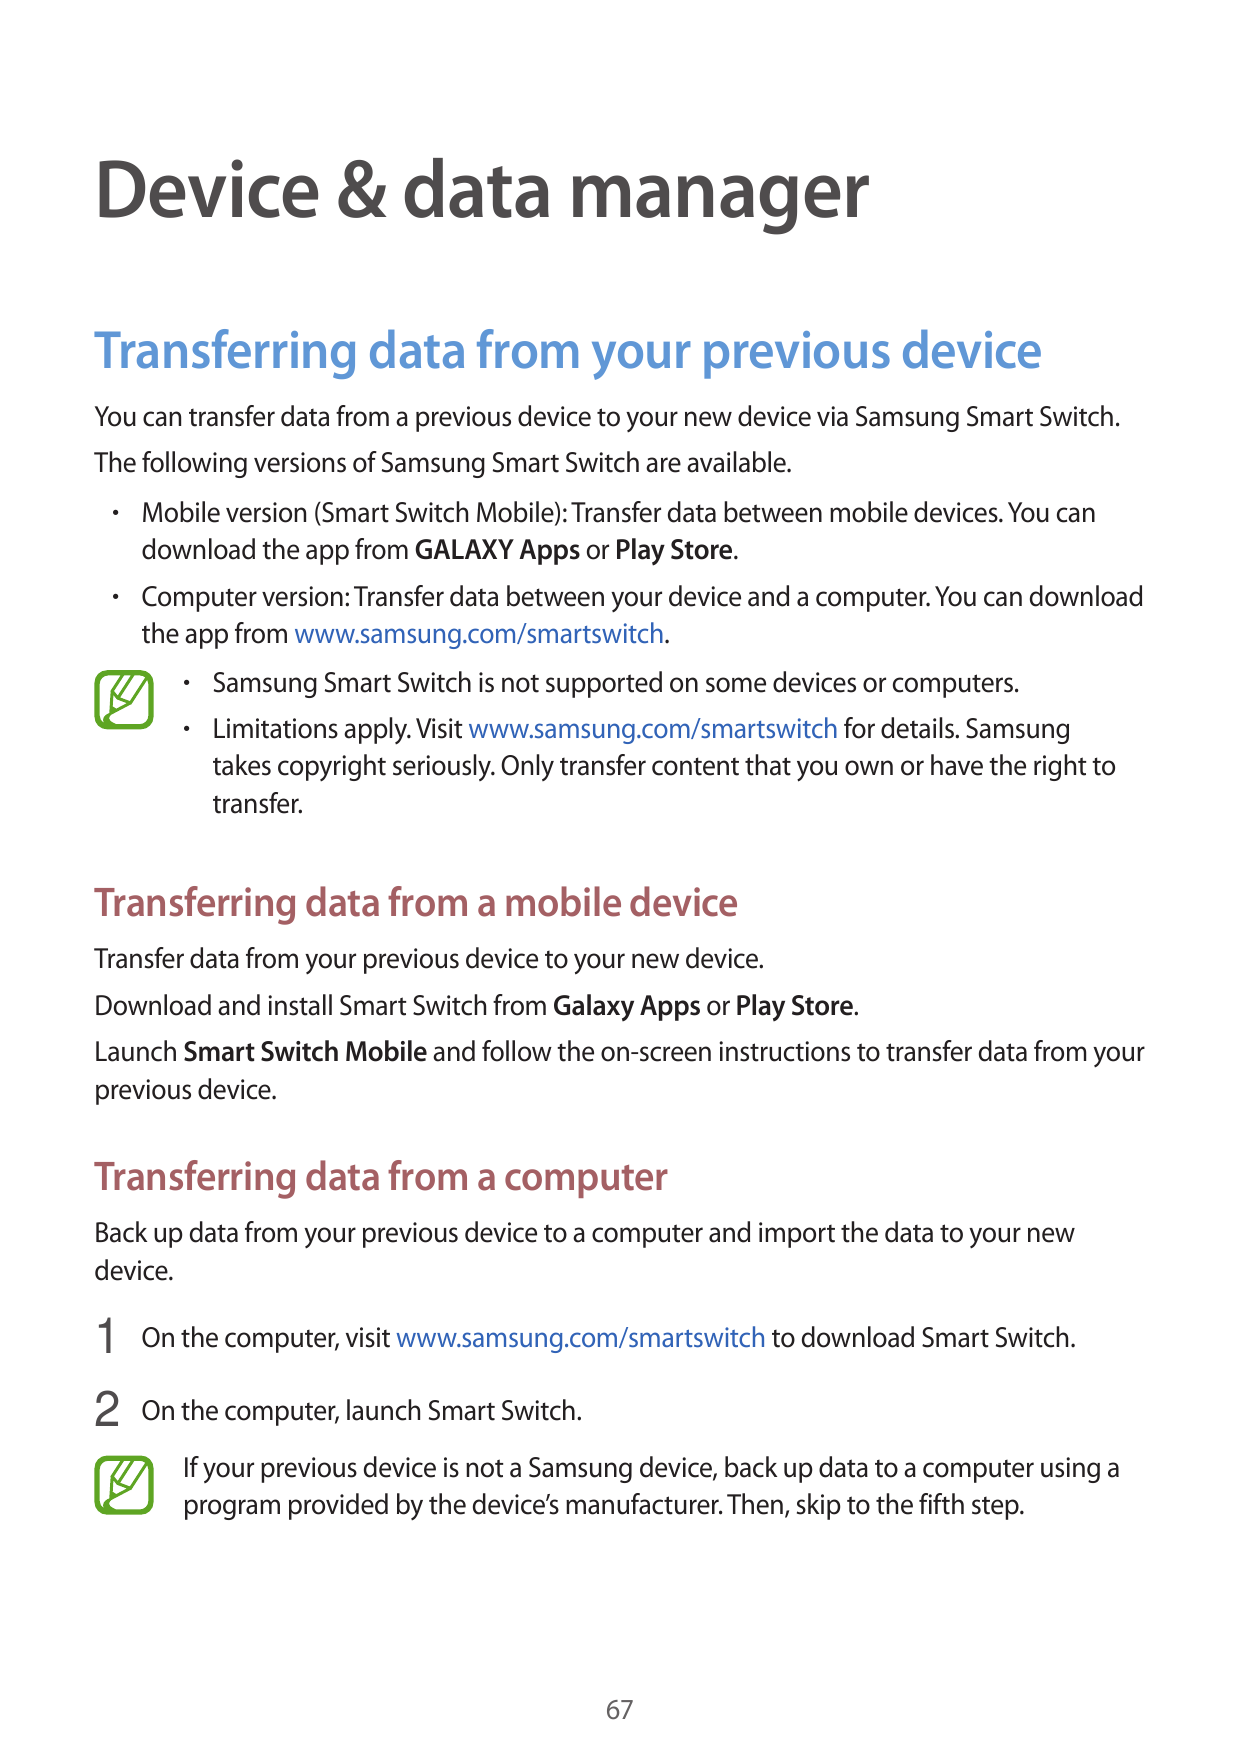 Device & data managerTransferring data from your previous deviceYou can transfer data from a previous device to your new device 